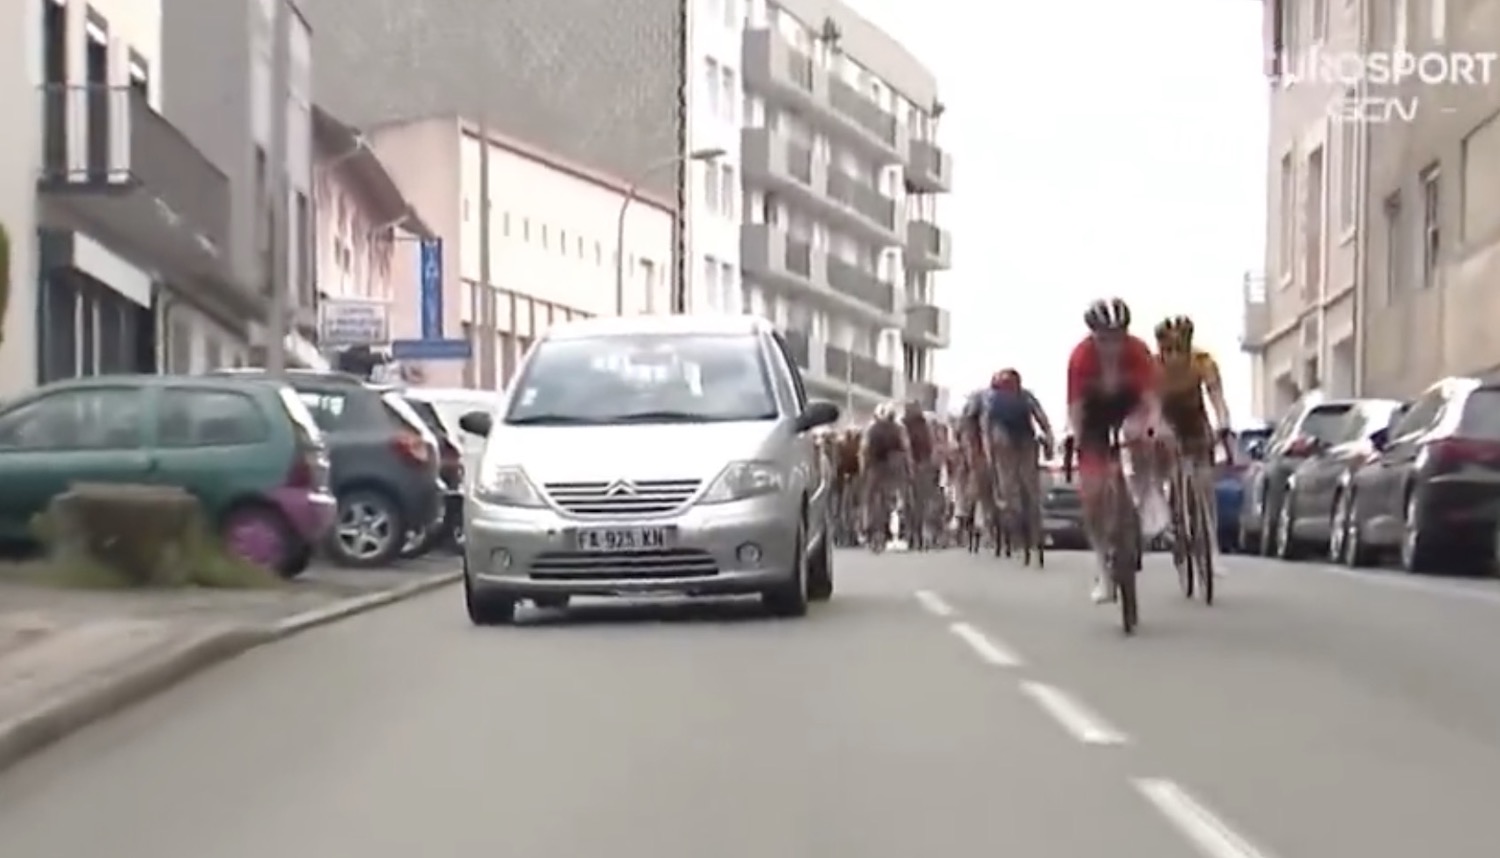 Riders shake their heads in confusion as they pass a car on the race course.